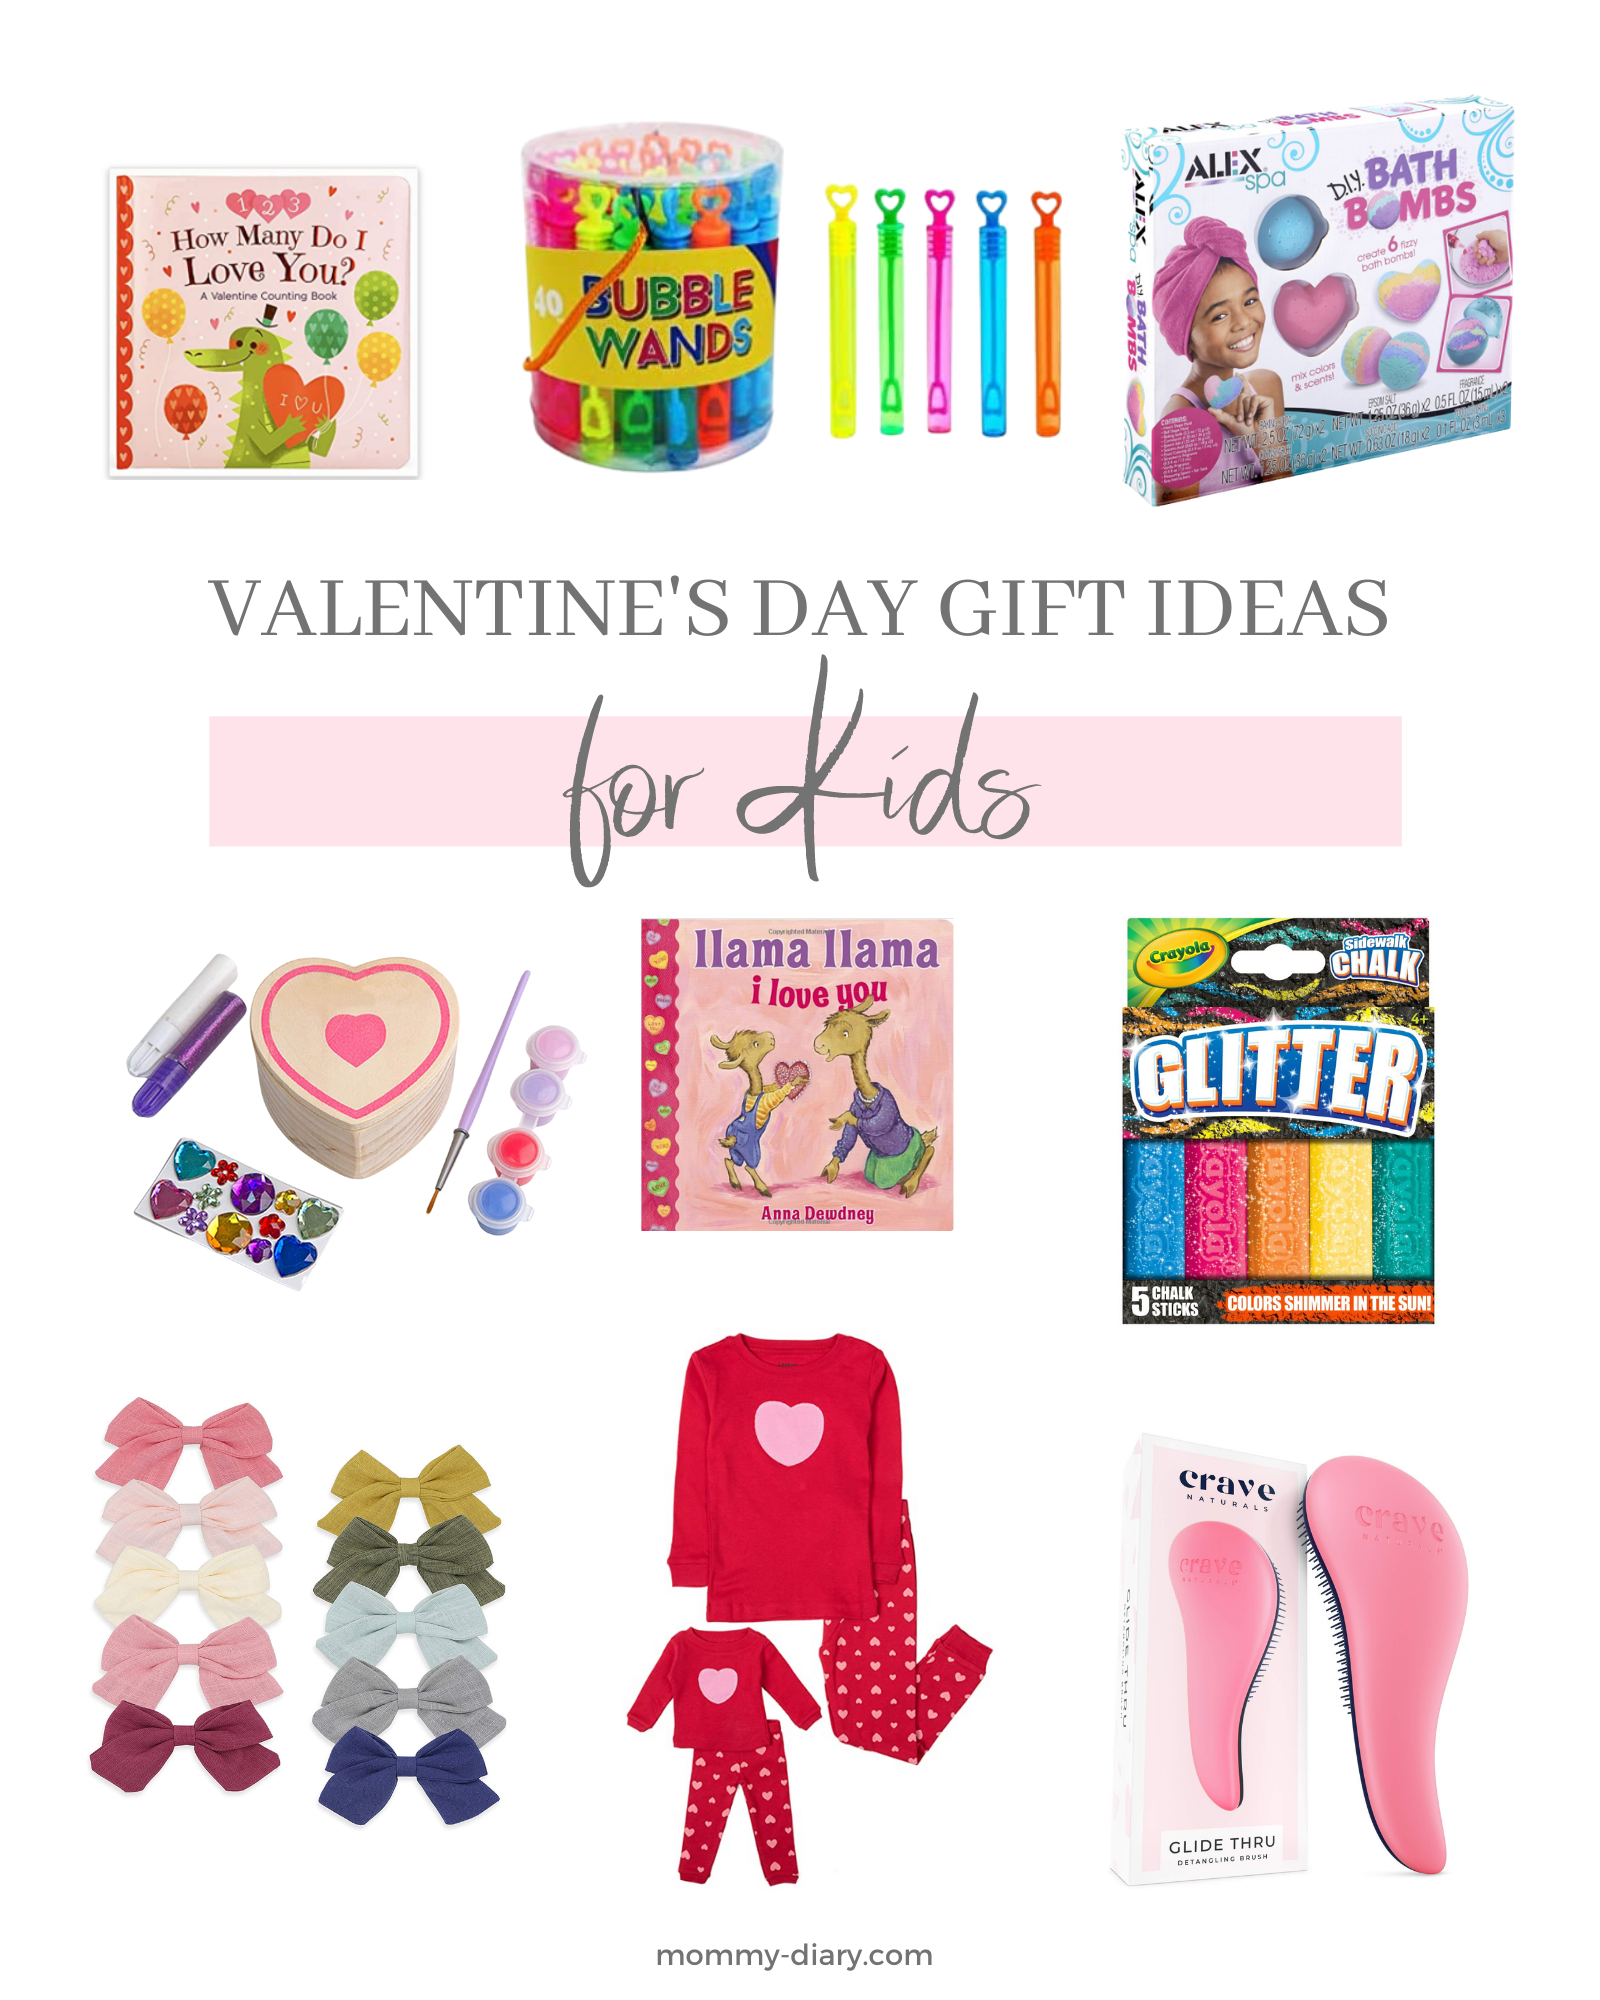 Valentines Day Gift Ideas for Kids